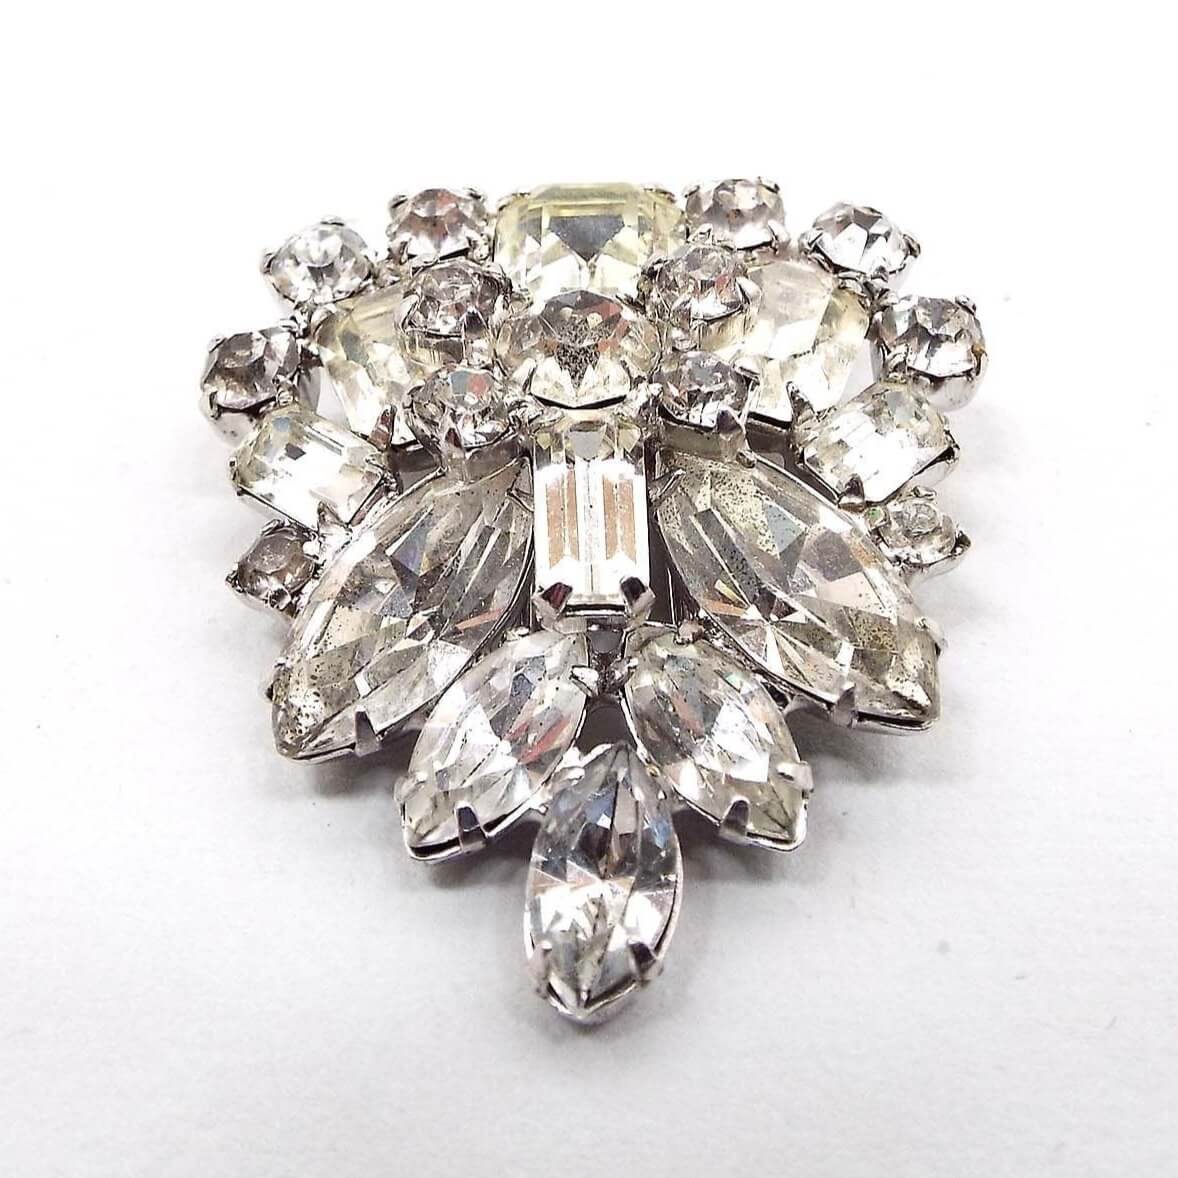 Front view of the 1940's Mid Century vintage rhinestone fur clip. The metal is silver tone in color. It has clusters of prong set clear rhinestones in marquis, round, baguette, and square shapes. The shape of the clip has rounded top sides and comes down to a point at the bottom.